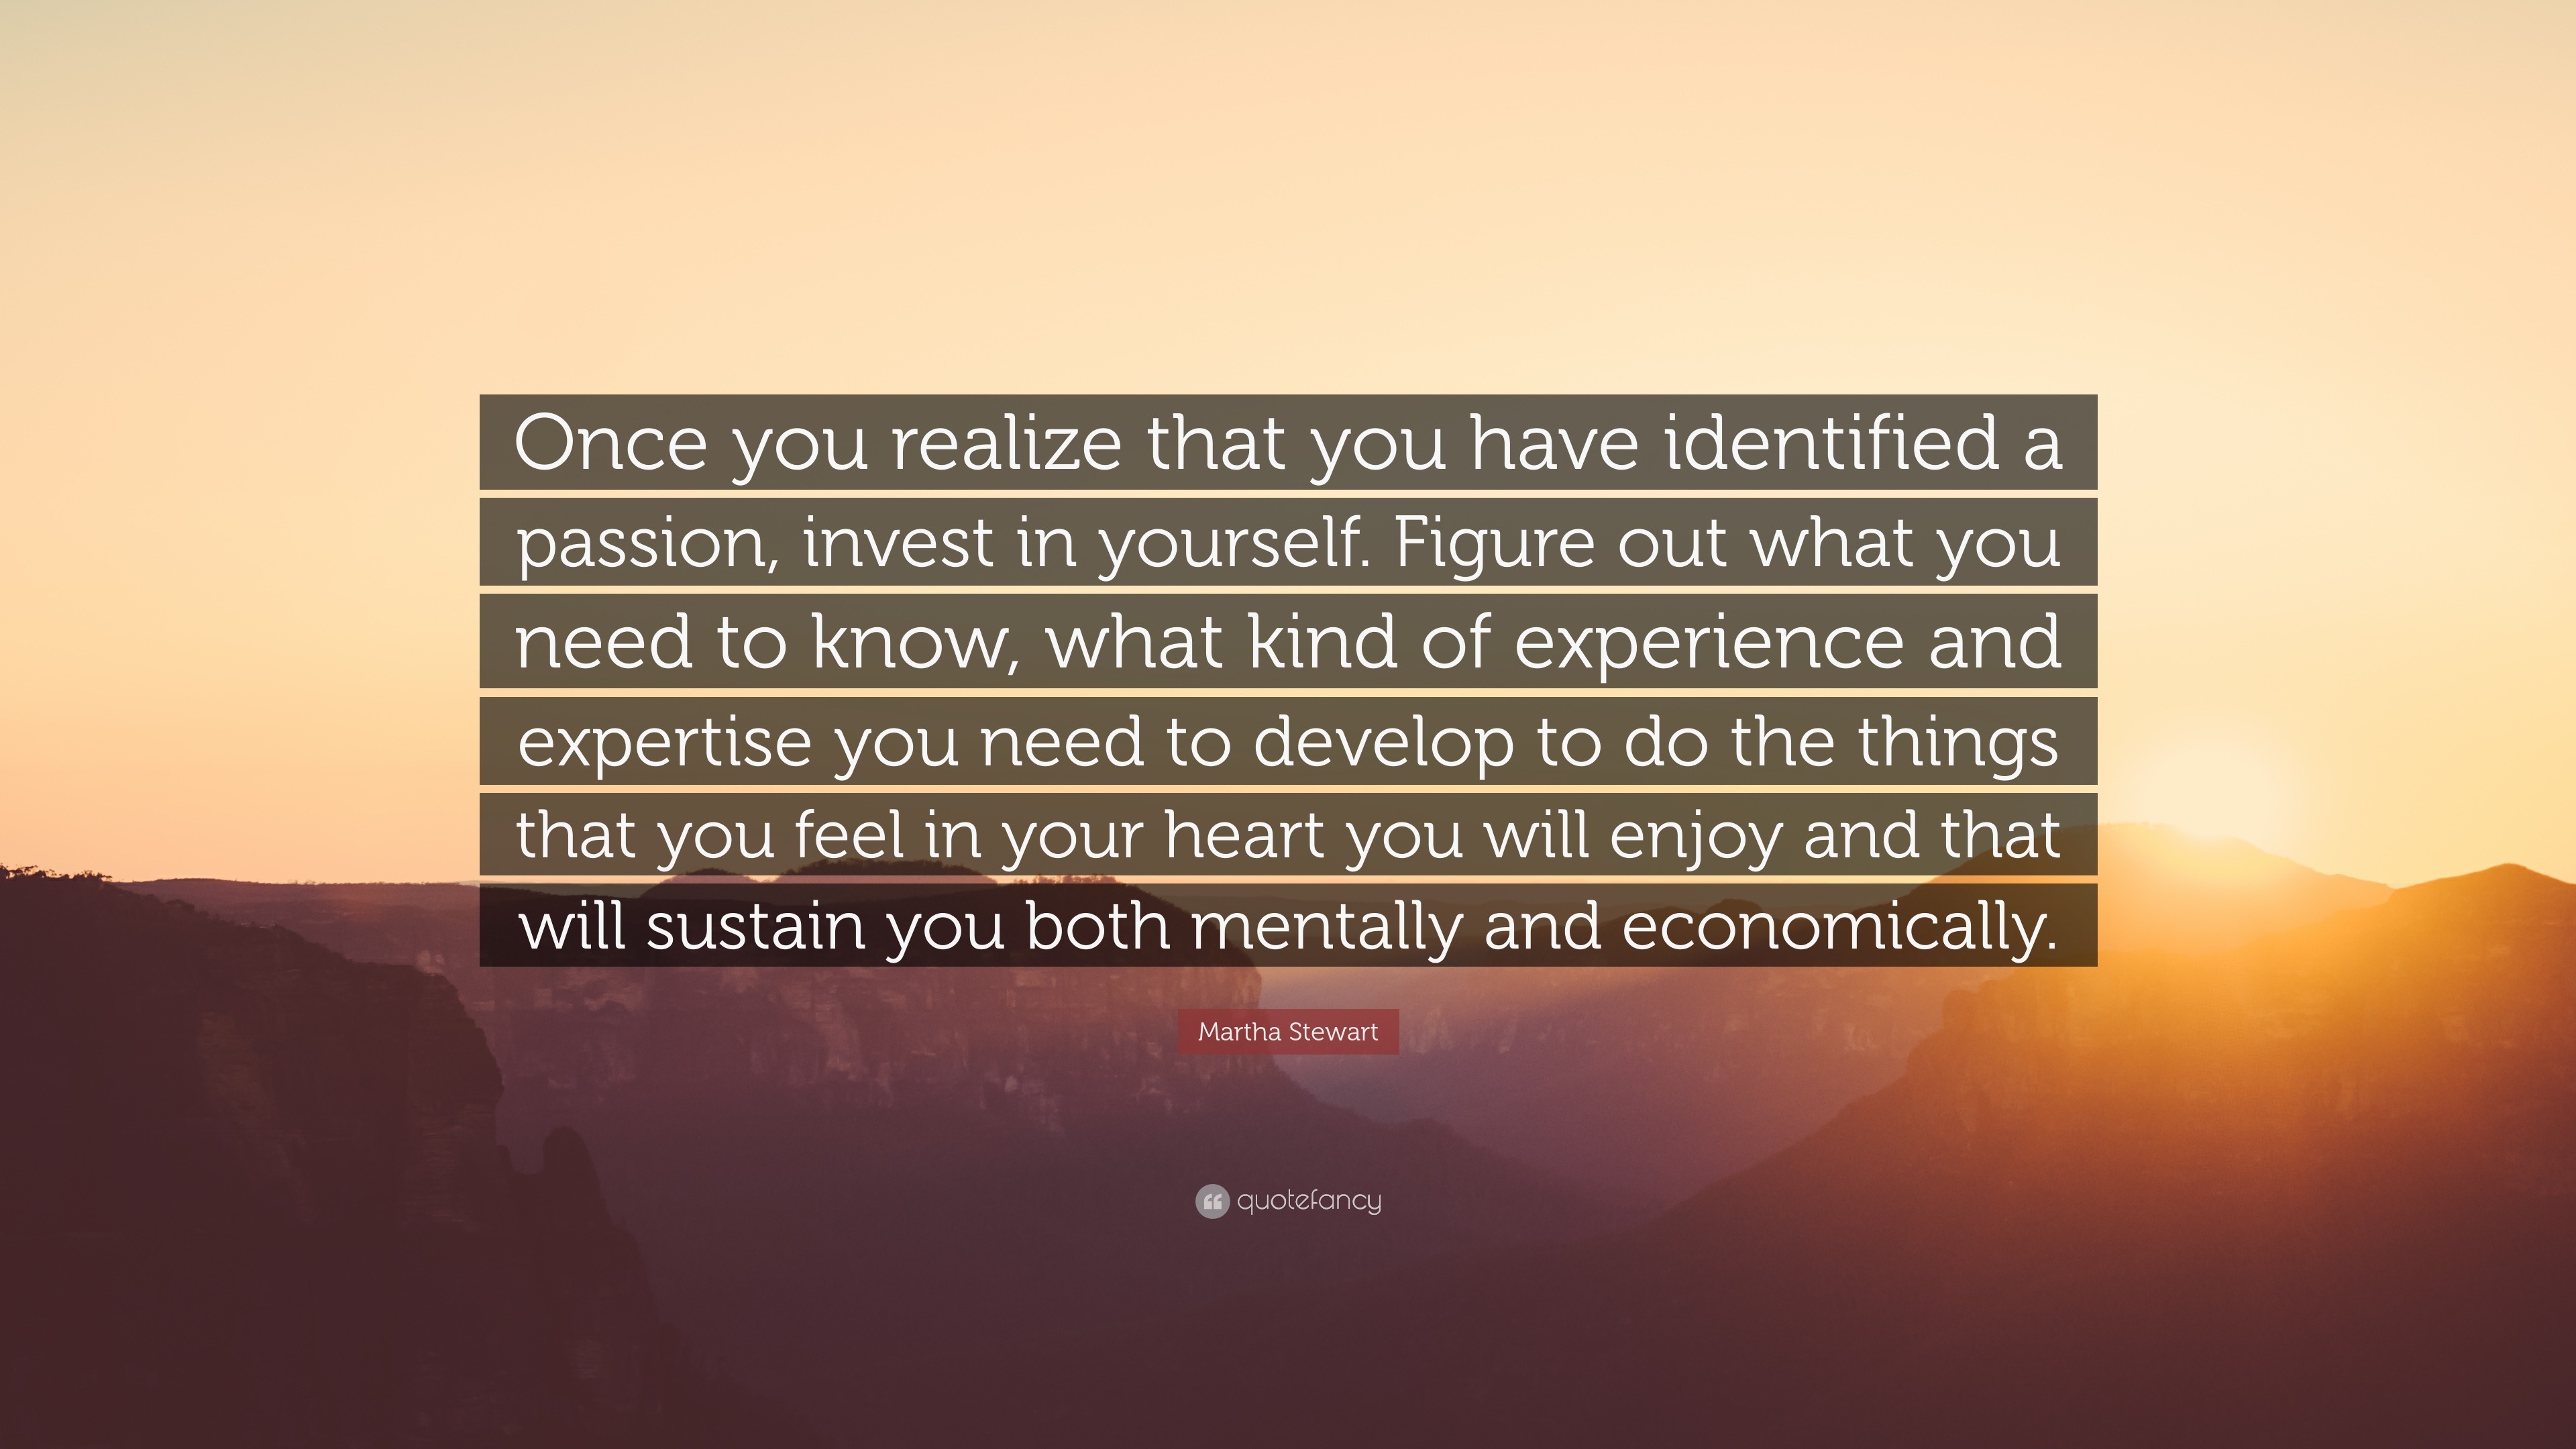 Martha Stewart Quote: “Once you realize that you have identified a ...